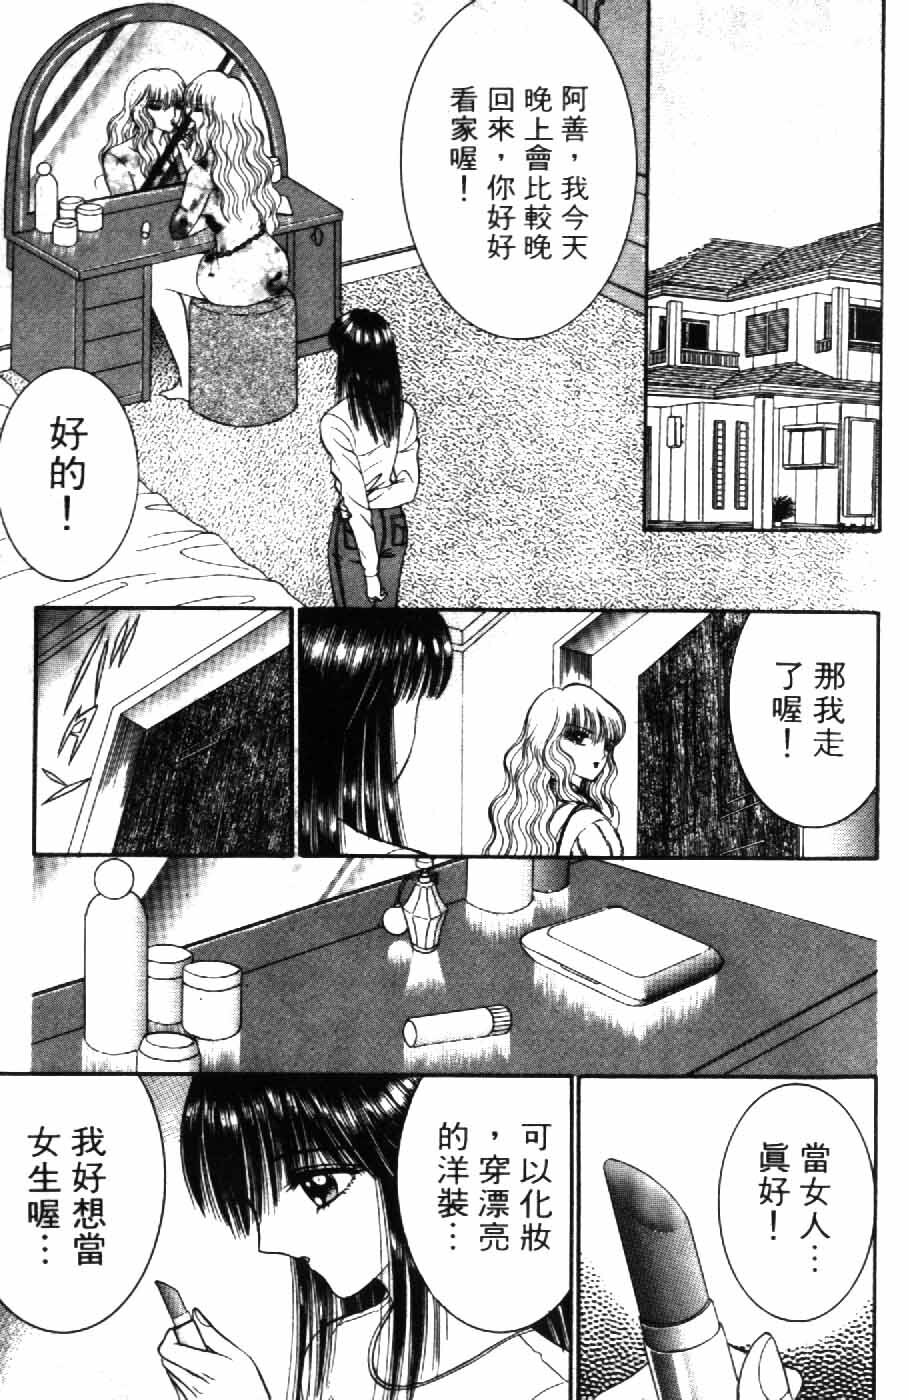 [Senno Knife] Ouma ga Horror Show 2 - Trans Sexual Special Show 2 | 顫慄博覽會 2 [Chinese] page 7 full